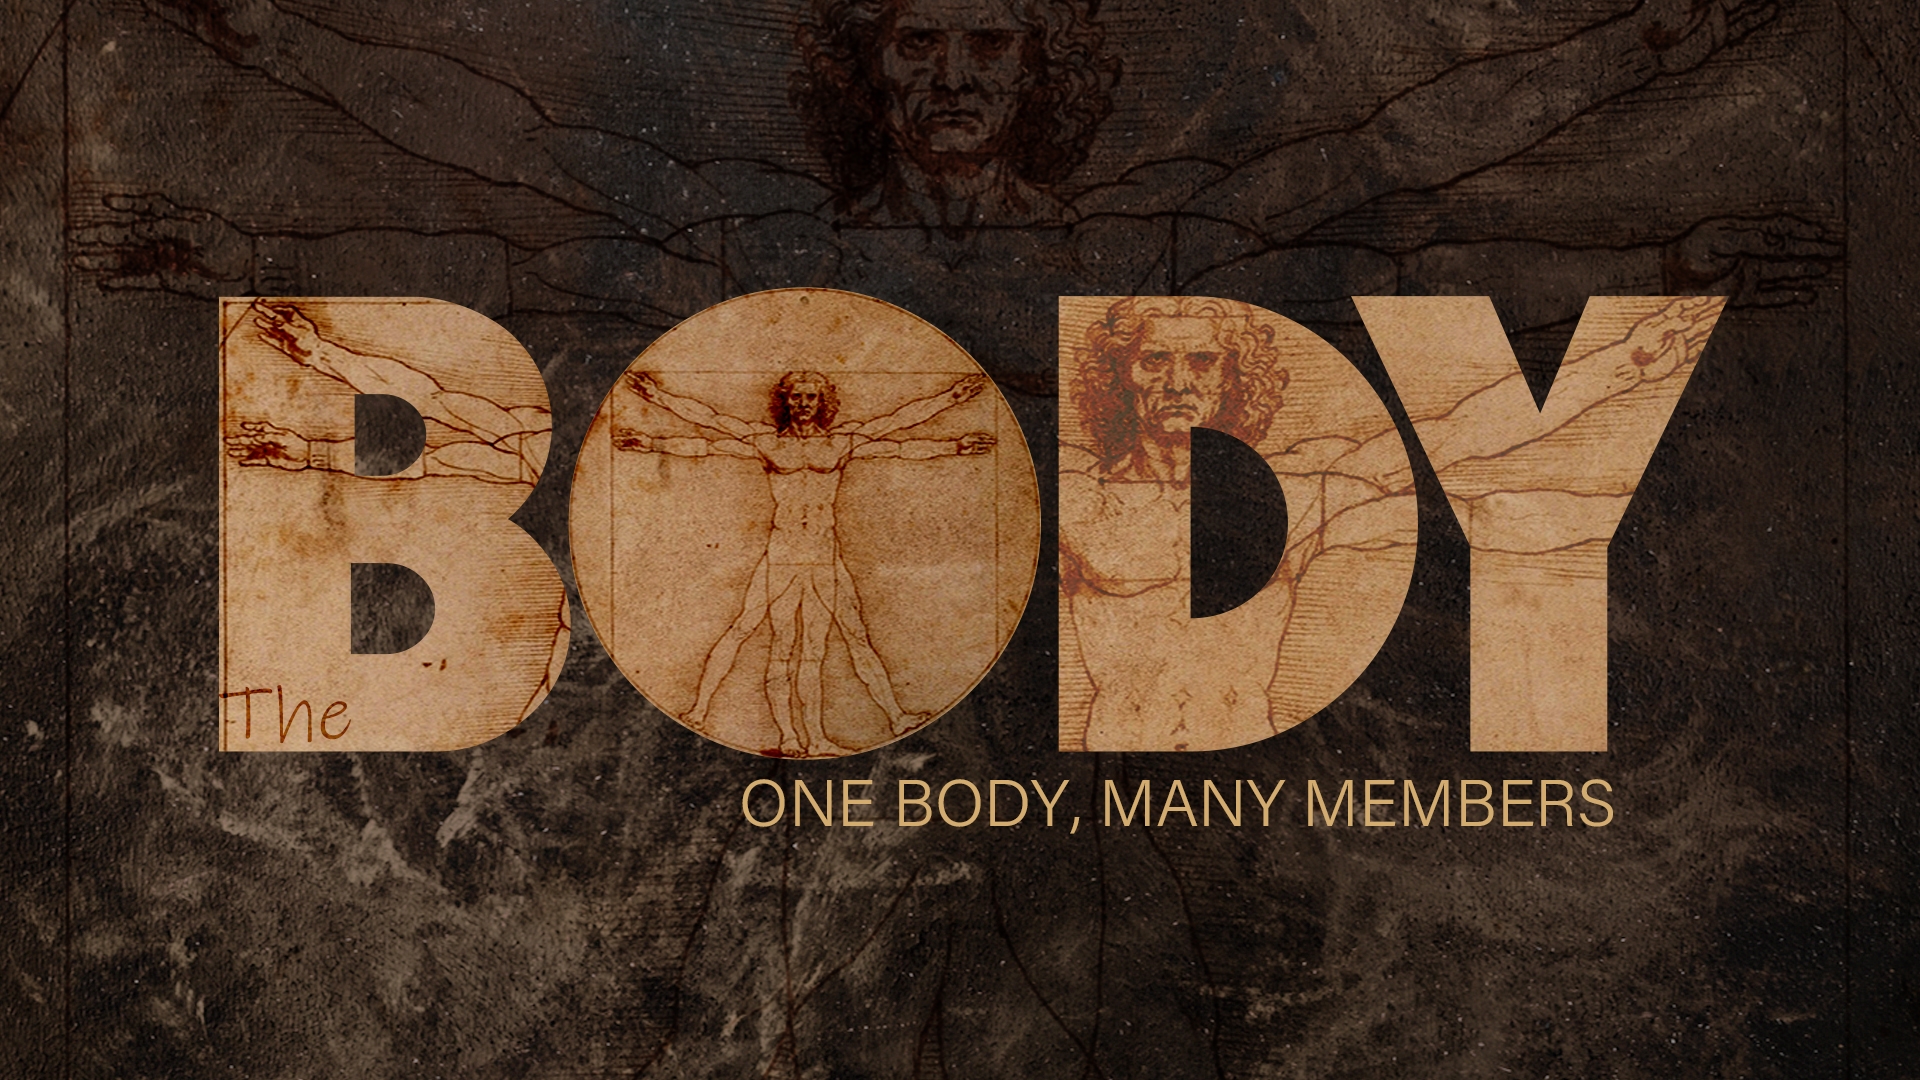 The Body: Unity in the Body